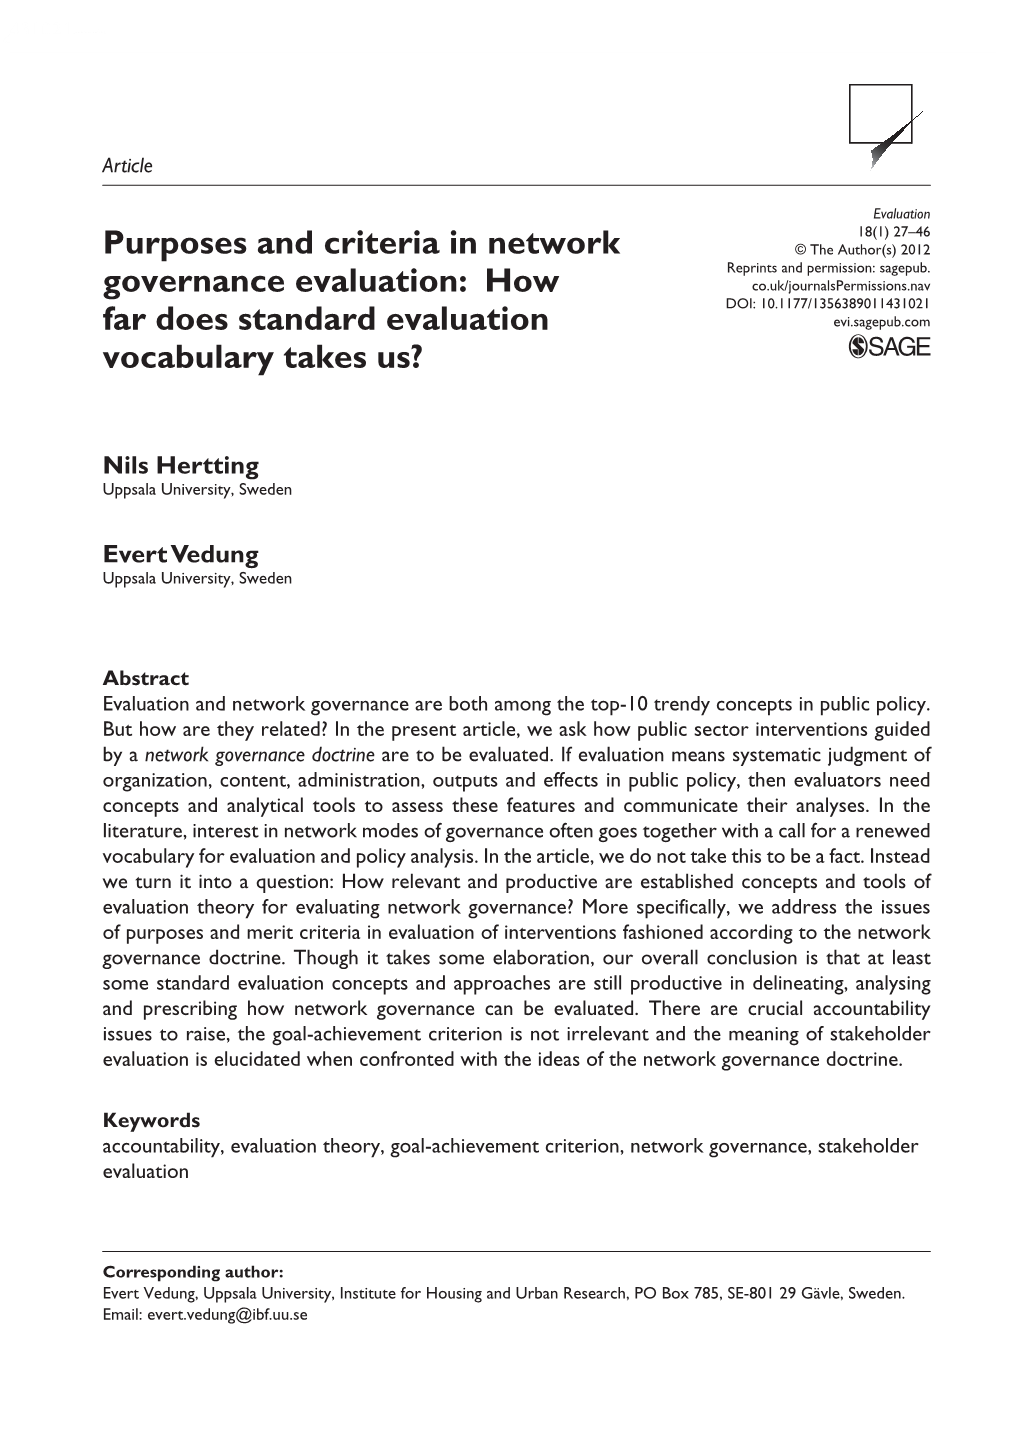 Purposes and Criteria in Network Governance Evaluation